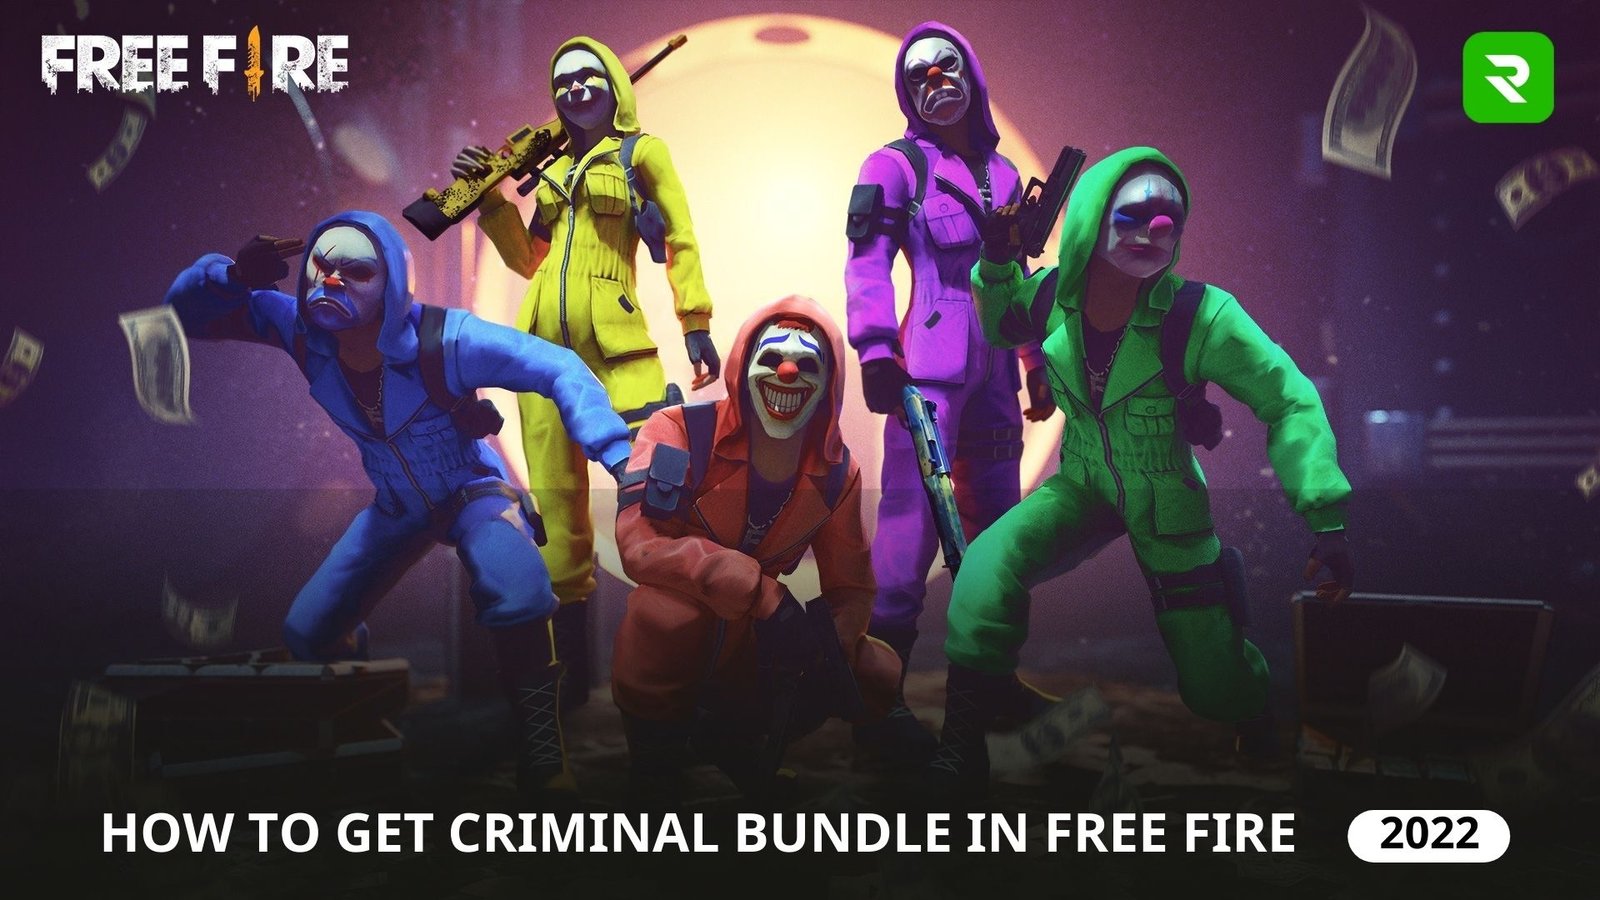 How to get Free Criminal bundle in Free Fire (2022)